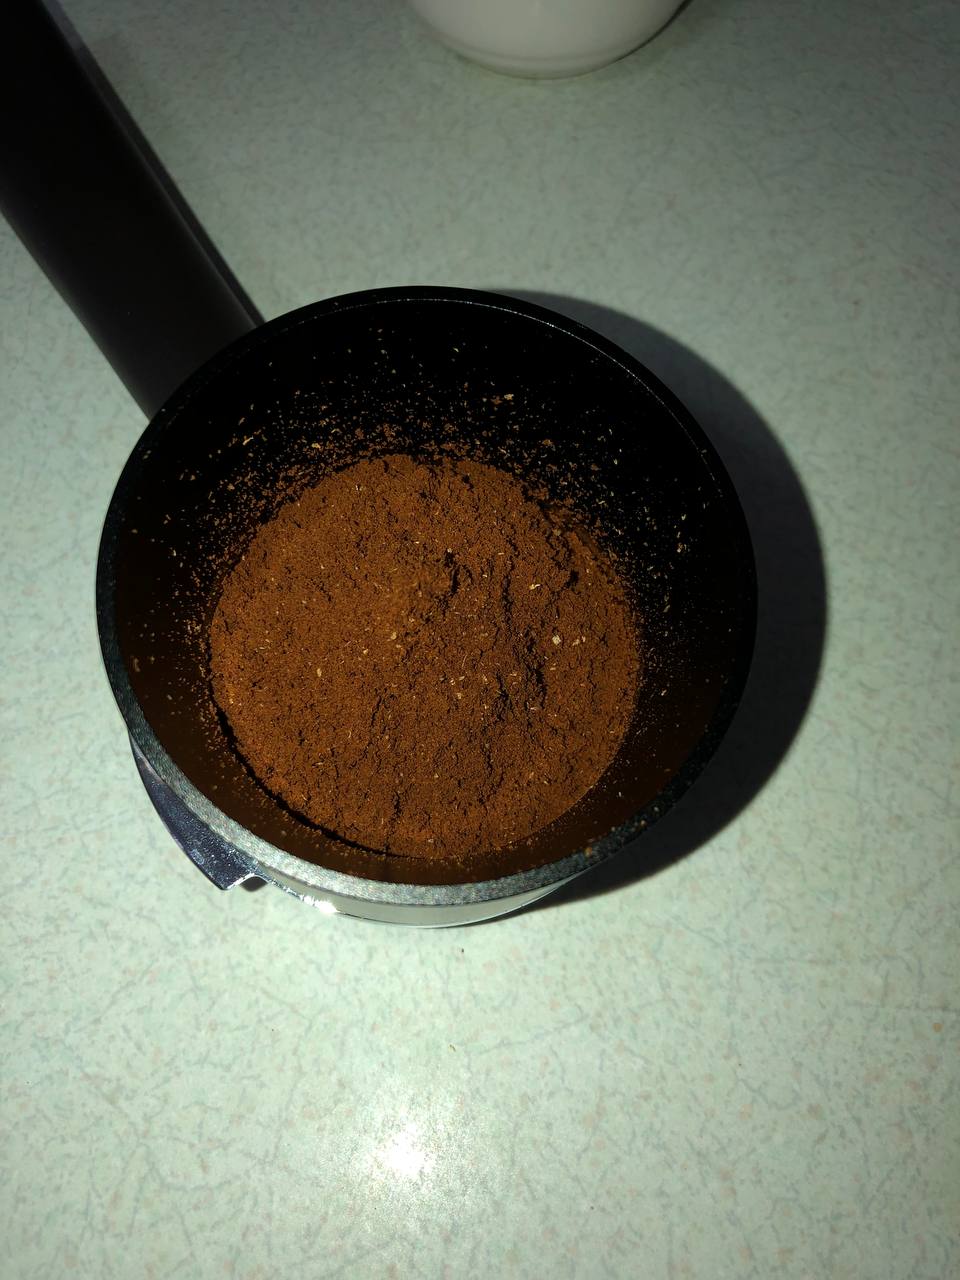 A portafilter with a dosing funnel holds fluffy finely ground coffee from the P100. There is a mound at the center of the ground coffee.